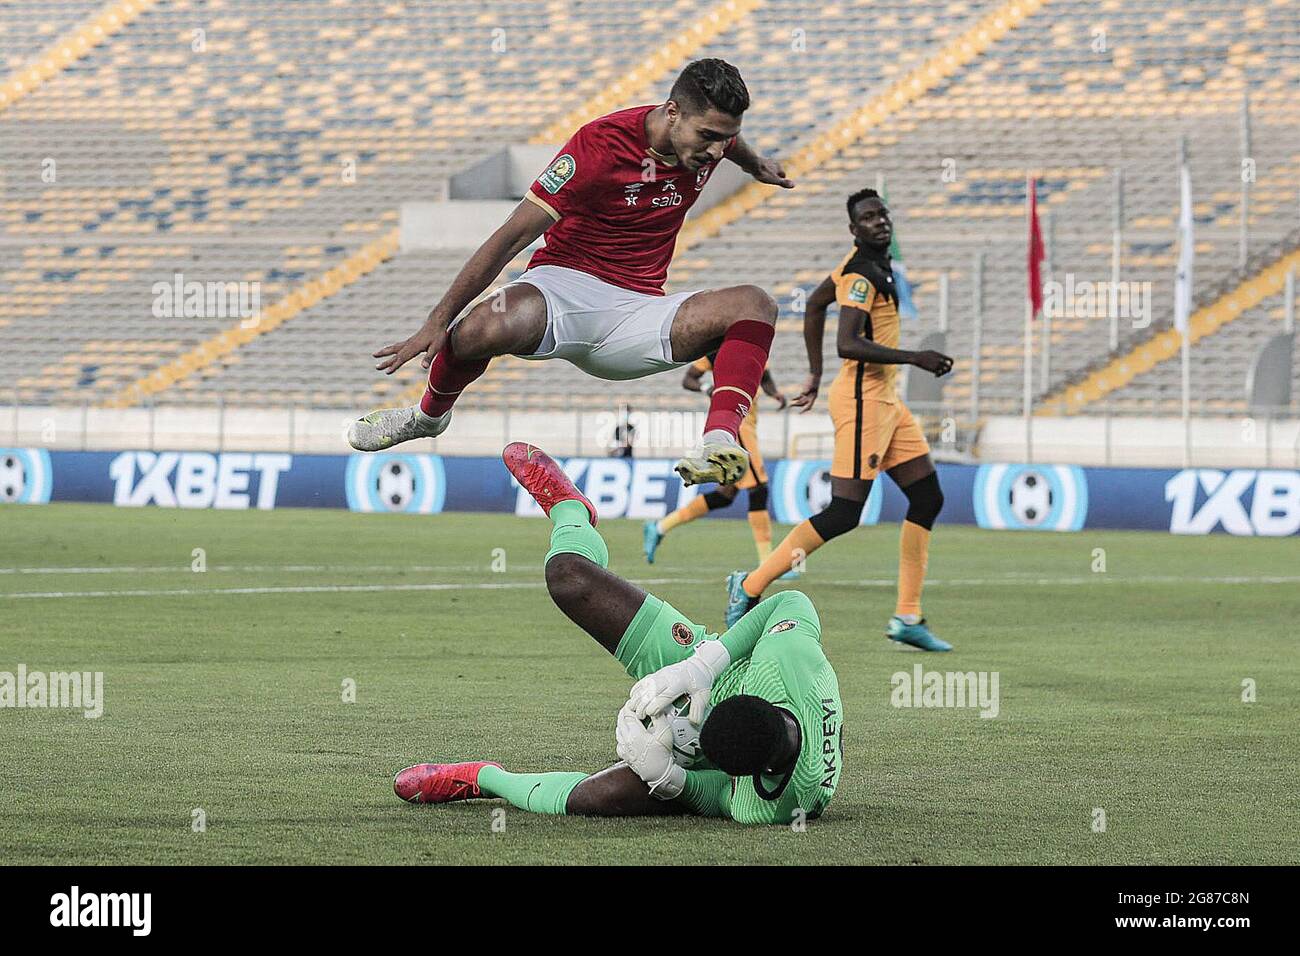 Casablanca, Morocco. 17th July, 2021. Al Ahly's Mohamed Sherif (top) and Kaizer goalkeeper Daniel Akpeyi battle for the ball during the CAF Champions League Final soccer match between Kaizer Chiefs FC and Al Ahly SC at Mohamed V Stadium. Credit: Stringer/dpa/Alamy Live News Stock Photo